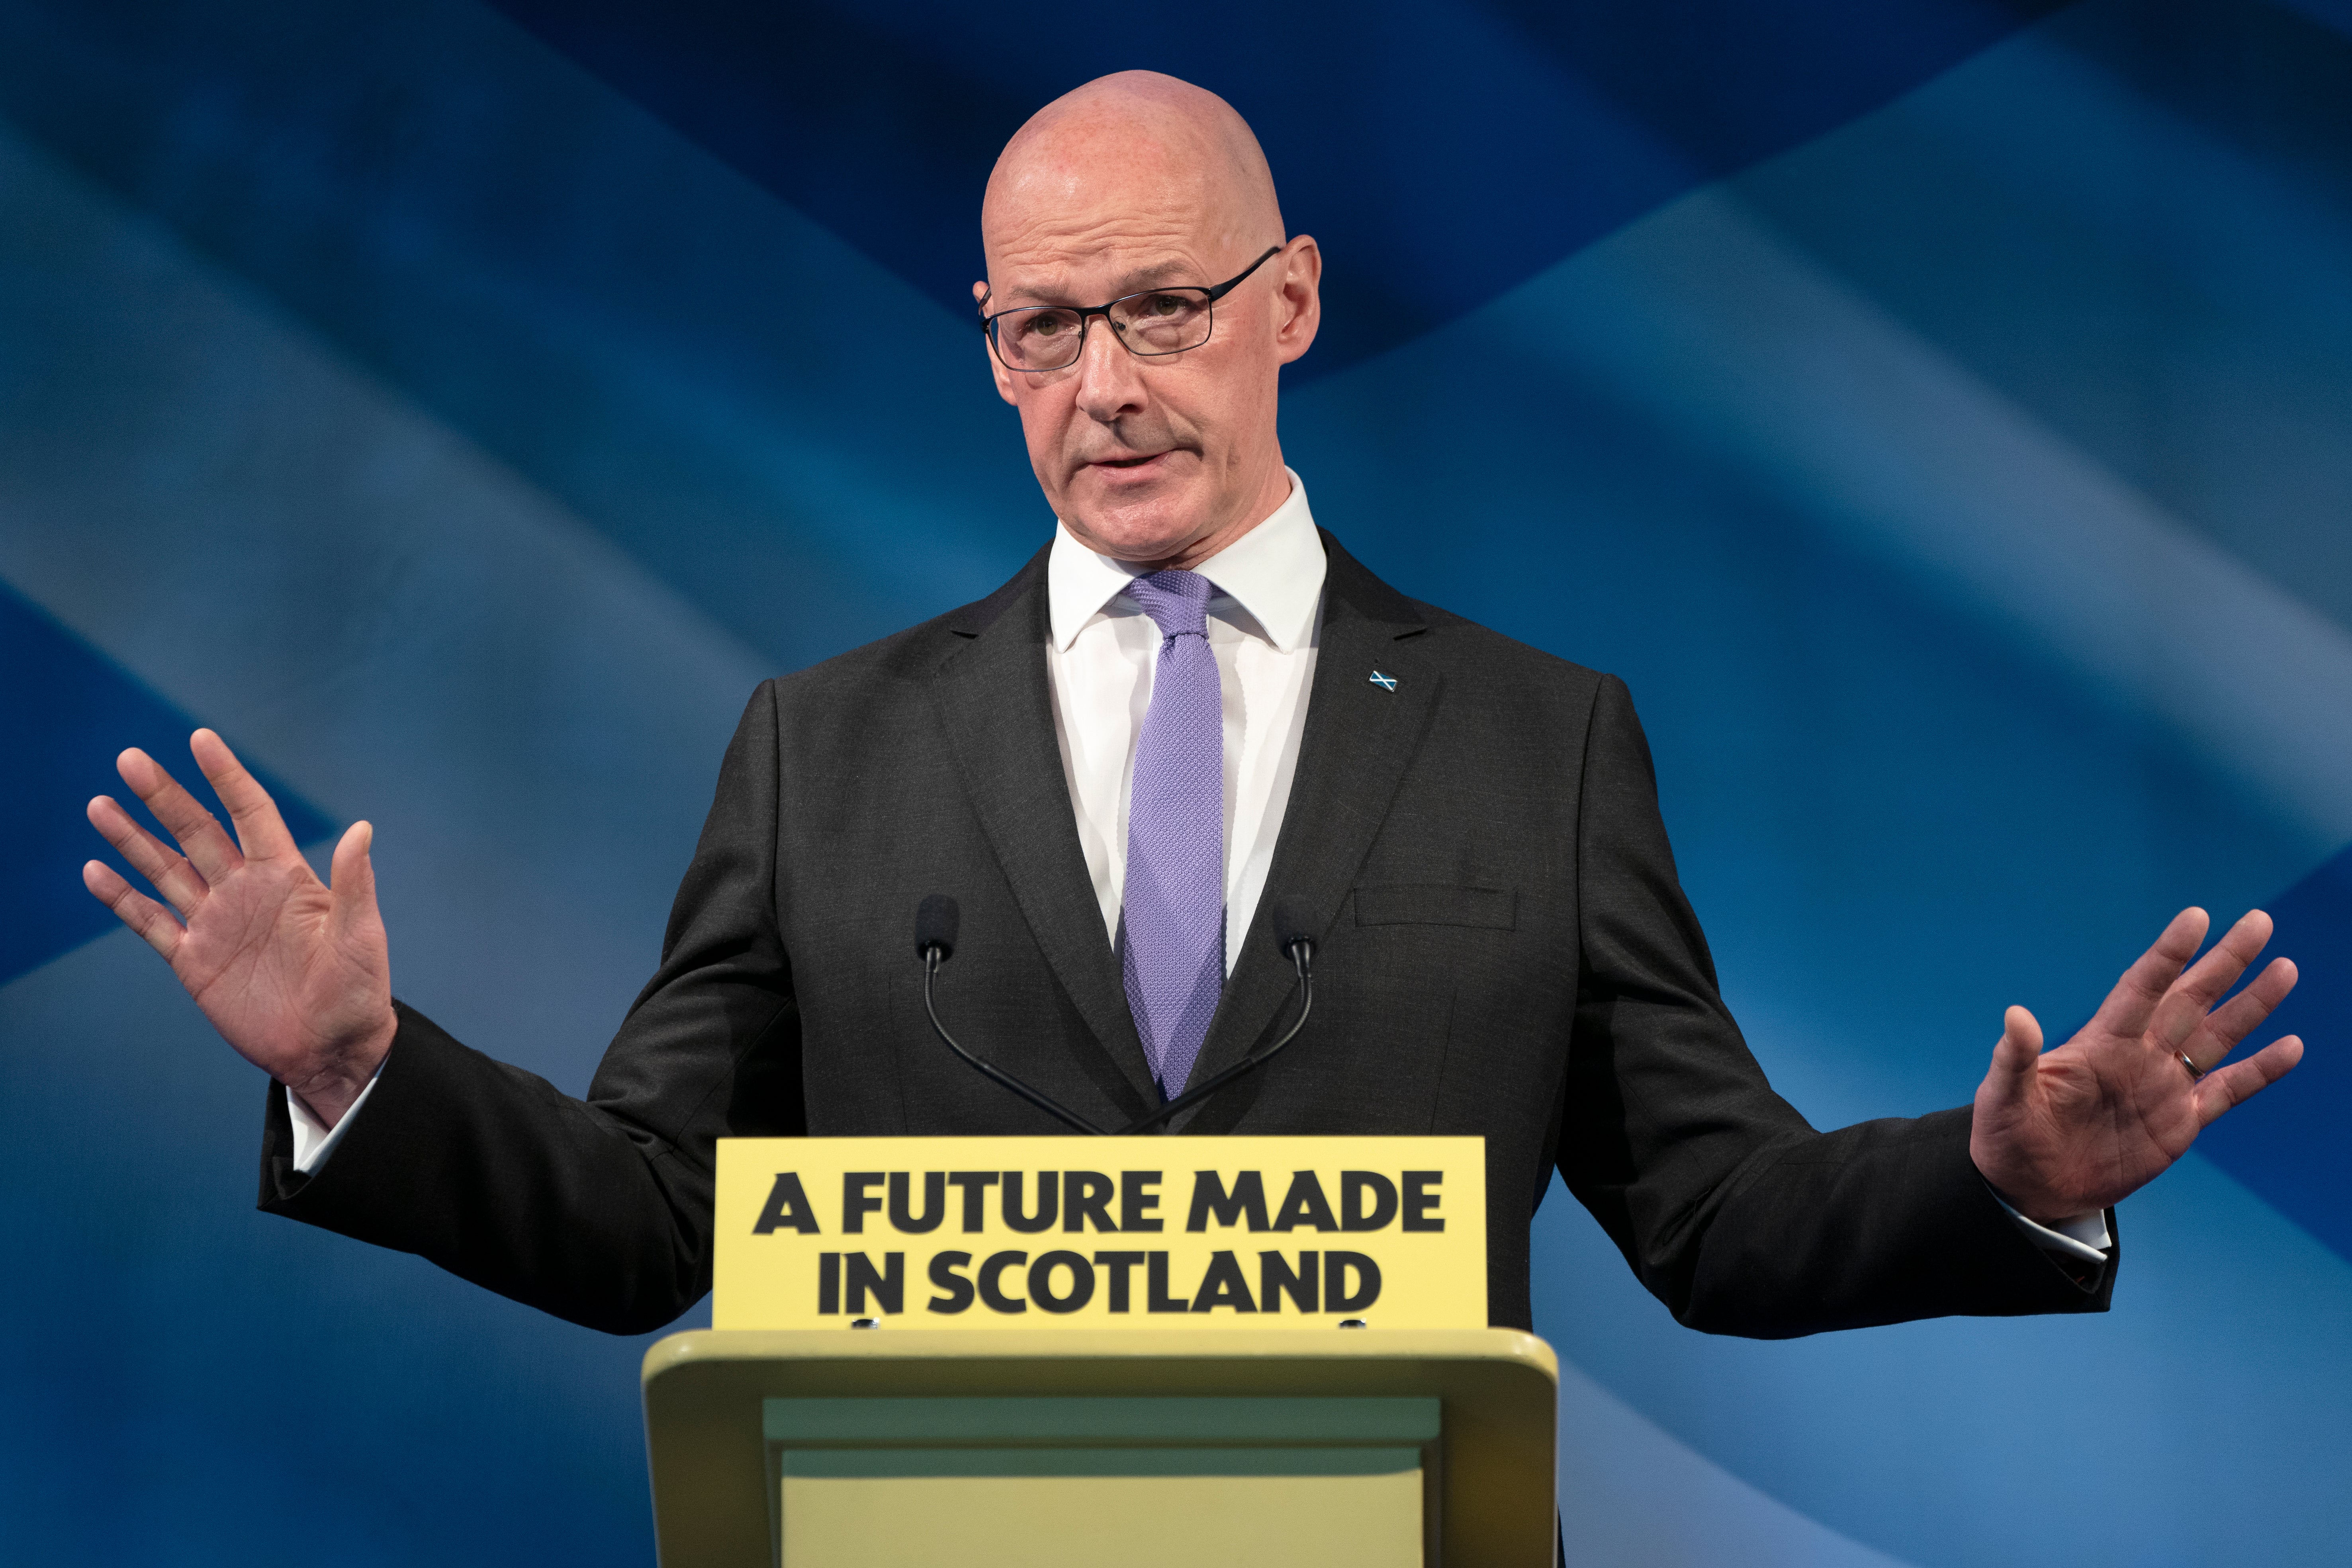 SNP leader John Swinney challenged Labour to tell voters: ‘Where is the change?’